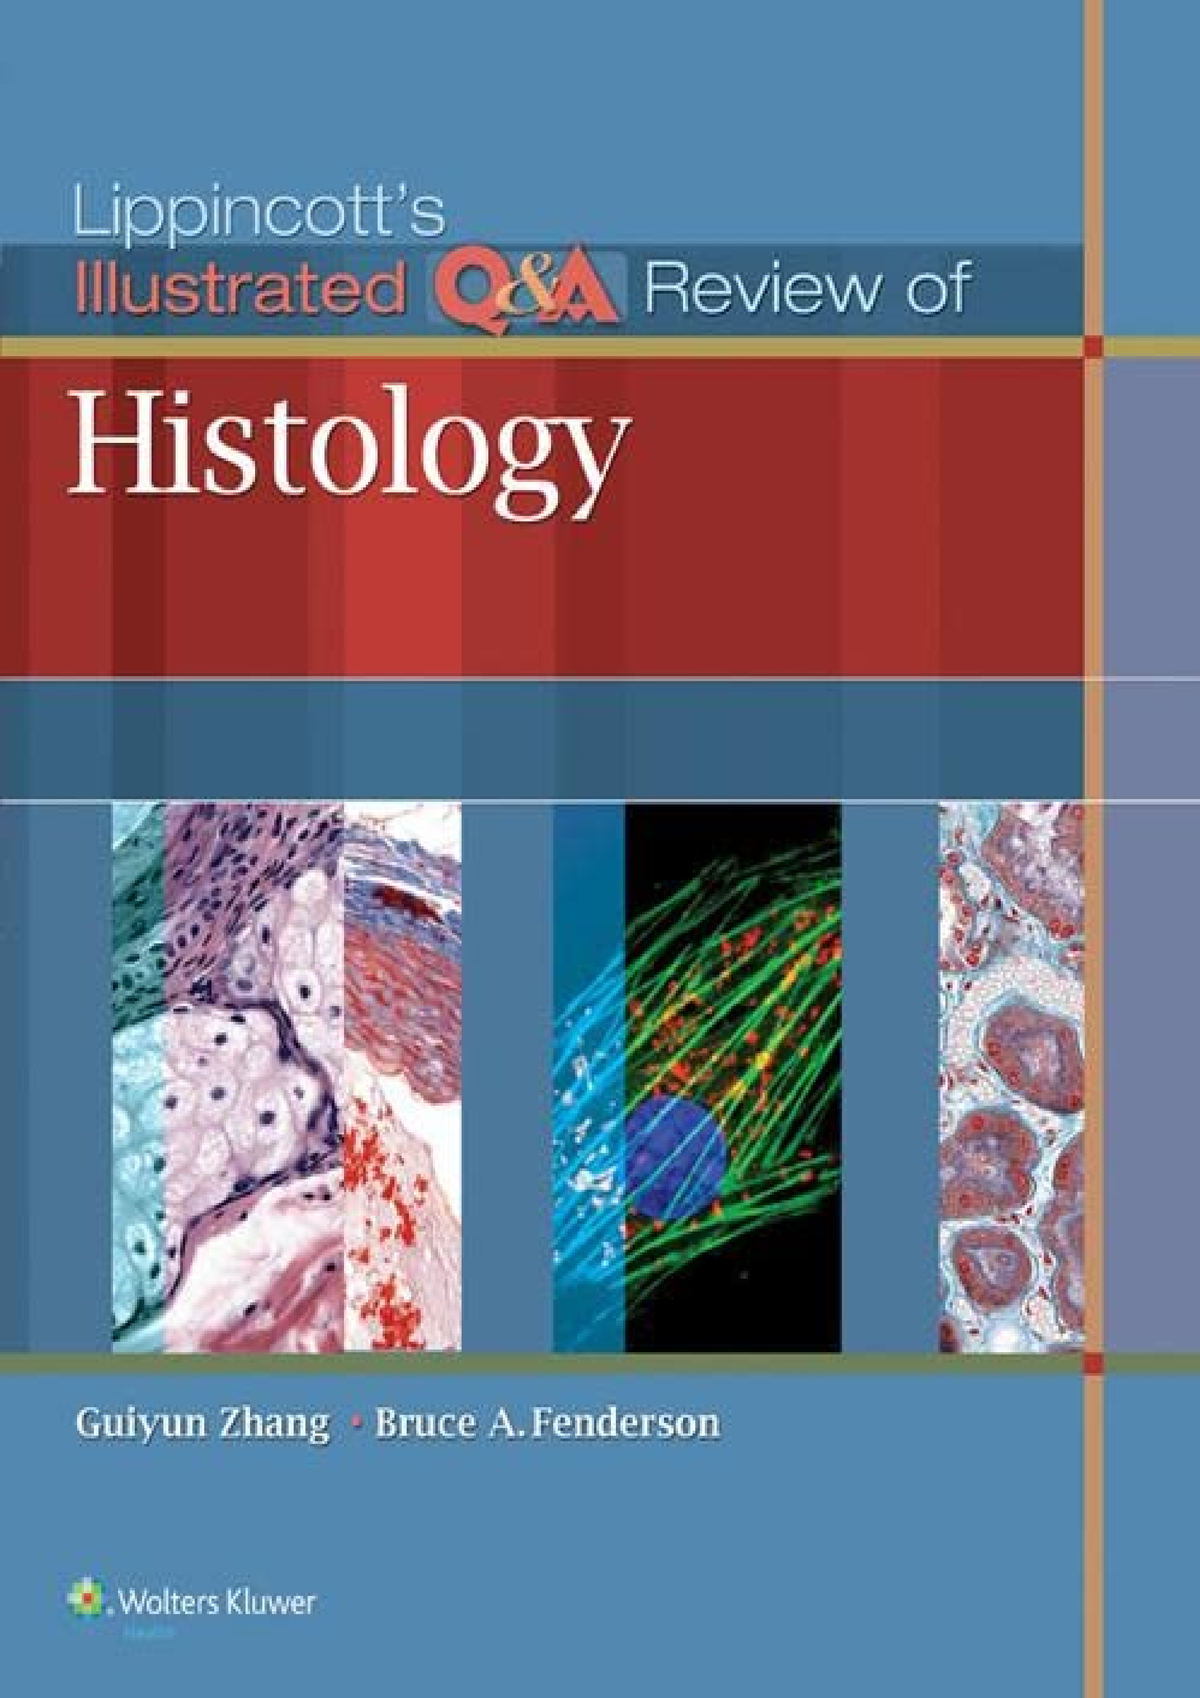 lippincott illustrated q & a review of histology pdf download